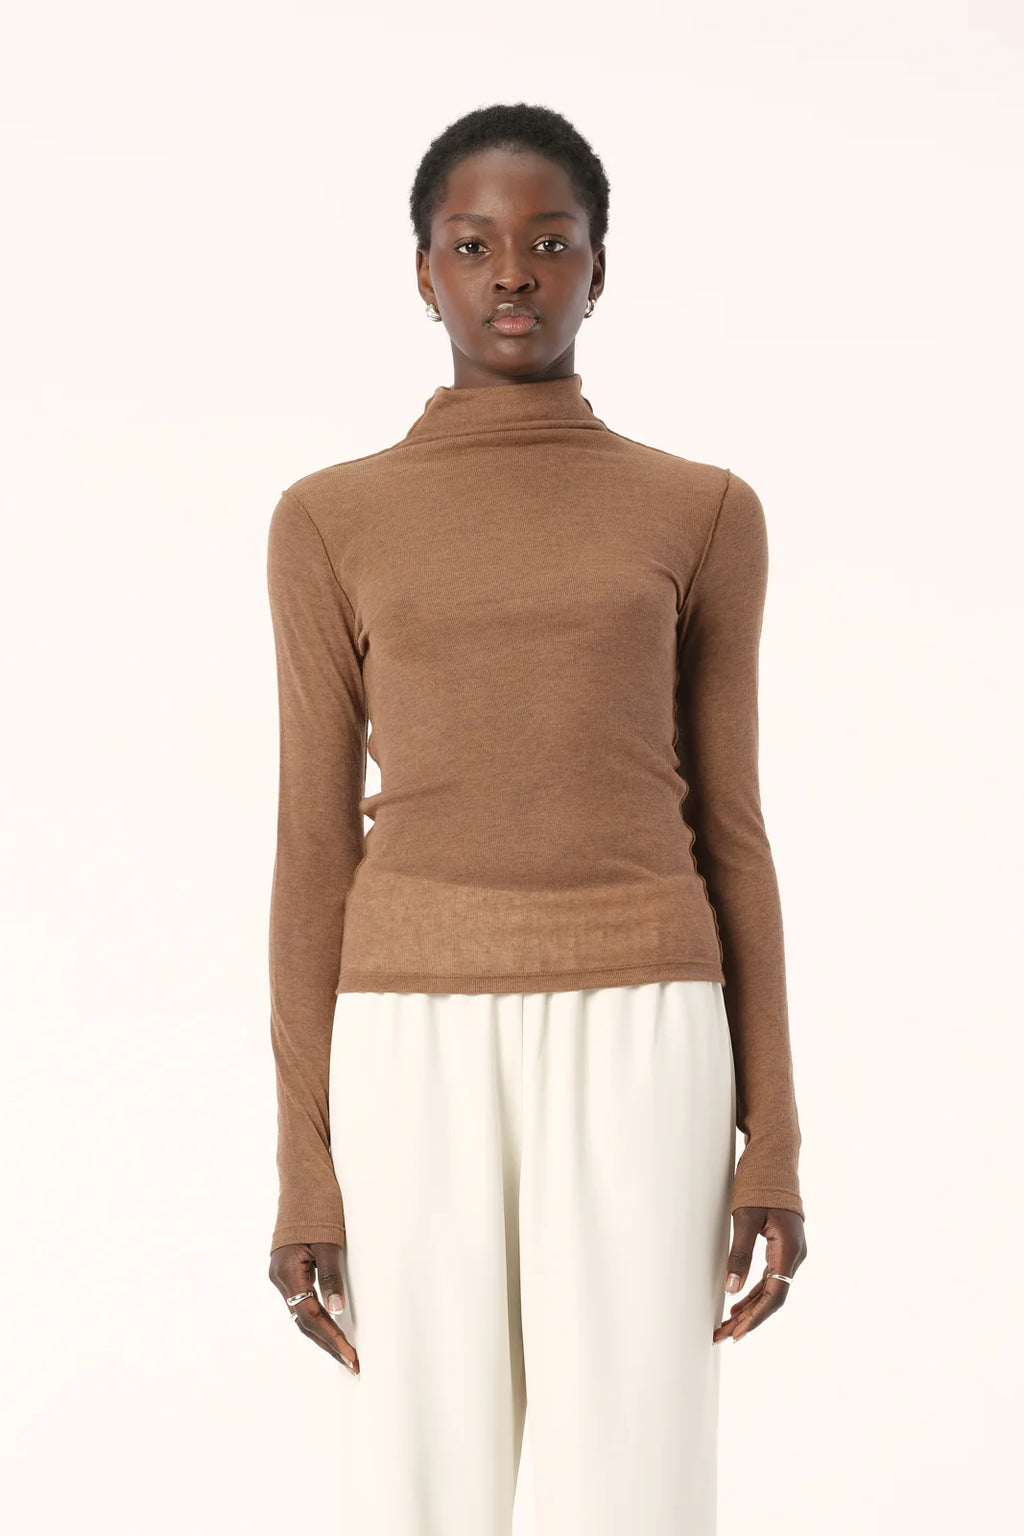 ELKA COLLECTIVE - Remi Top - Camel Marle